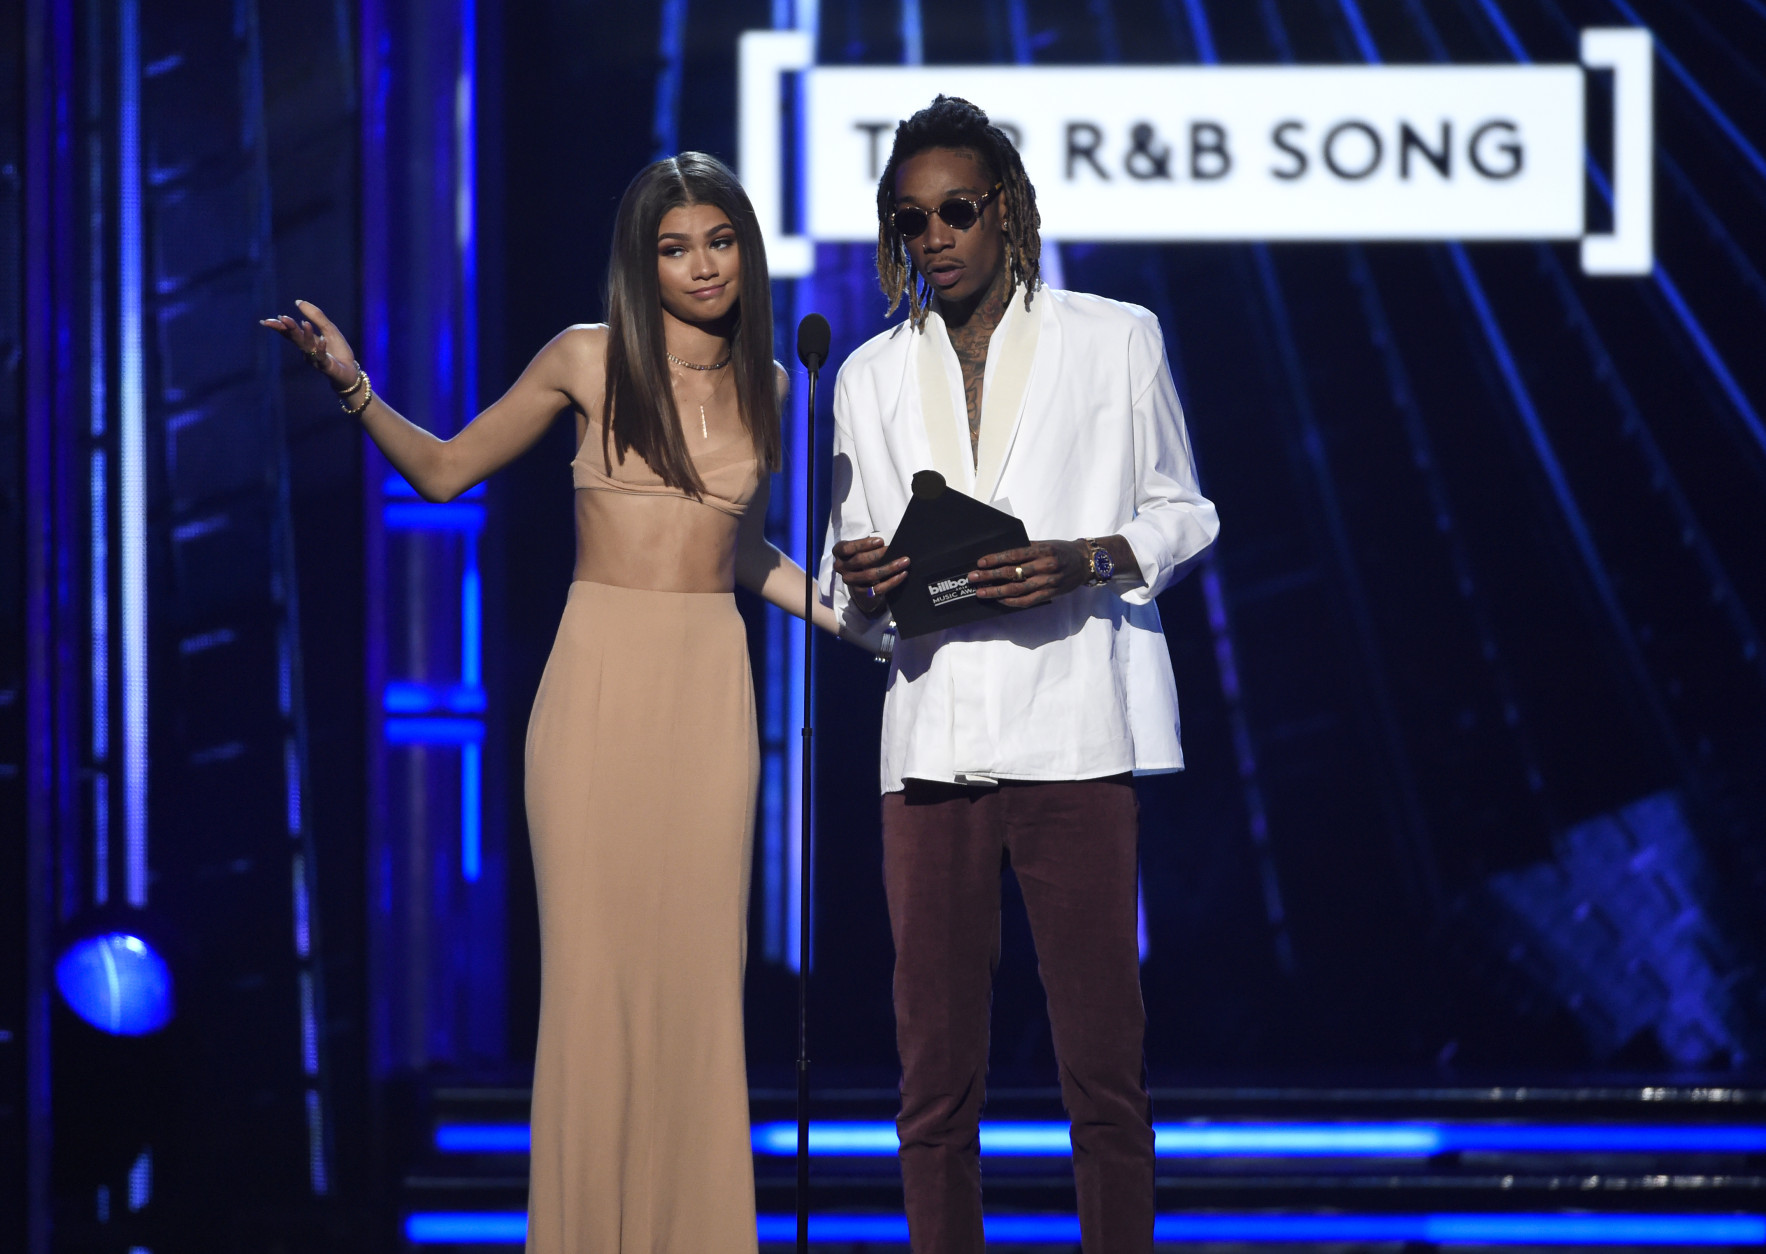 Zendaya, left, and Wiz Khalifa present the award for top R&amp;B song at the Billboard Music Awards at the T-Mobile Arena on Sunday, May 22, 2016, in Las Vegas. (Photo by Chris Pizzello/Invision/AP)